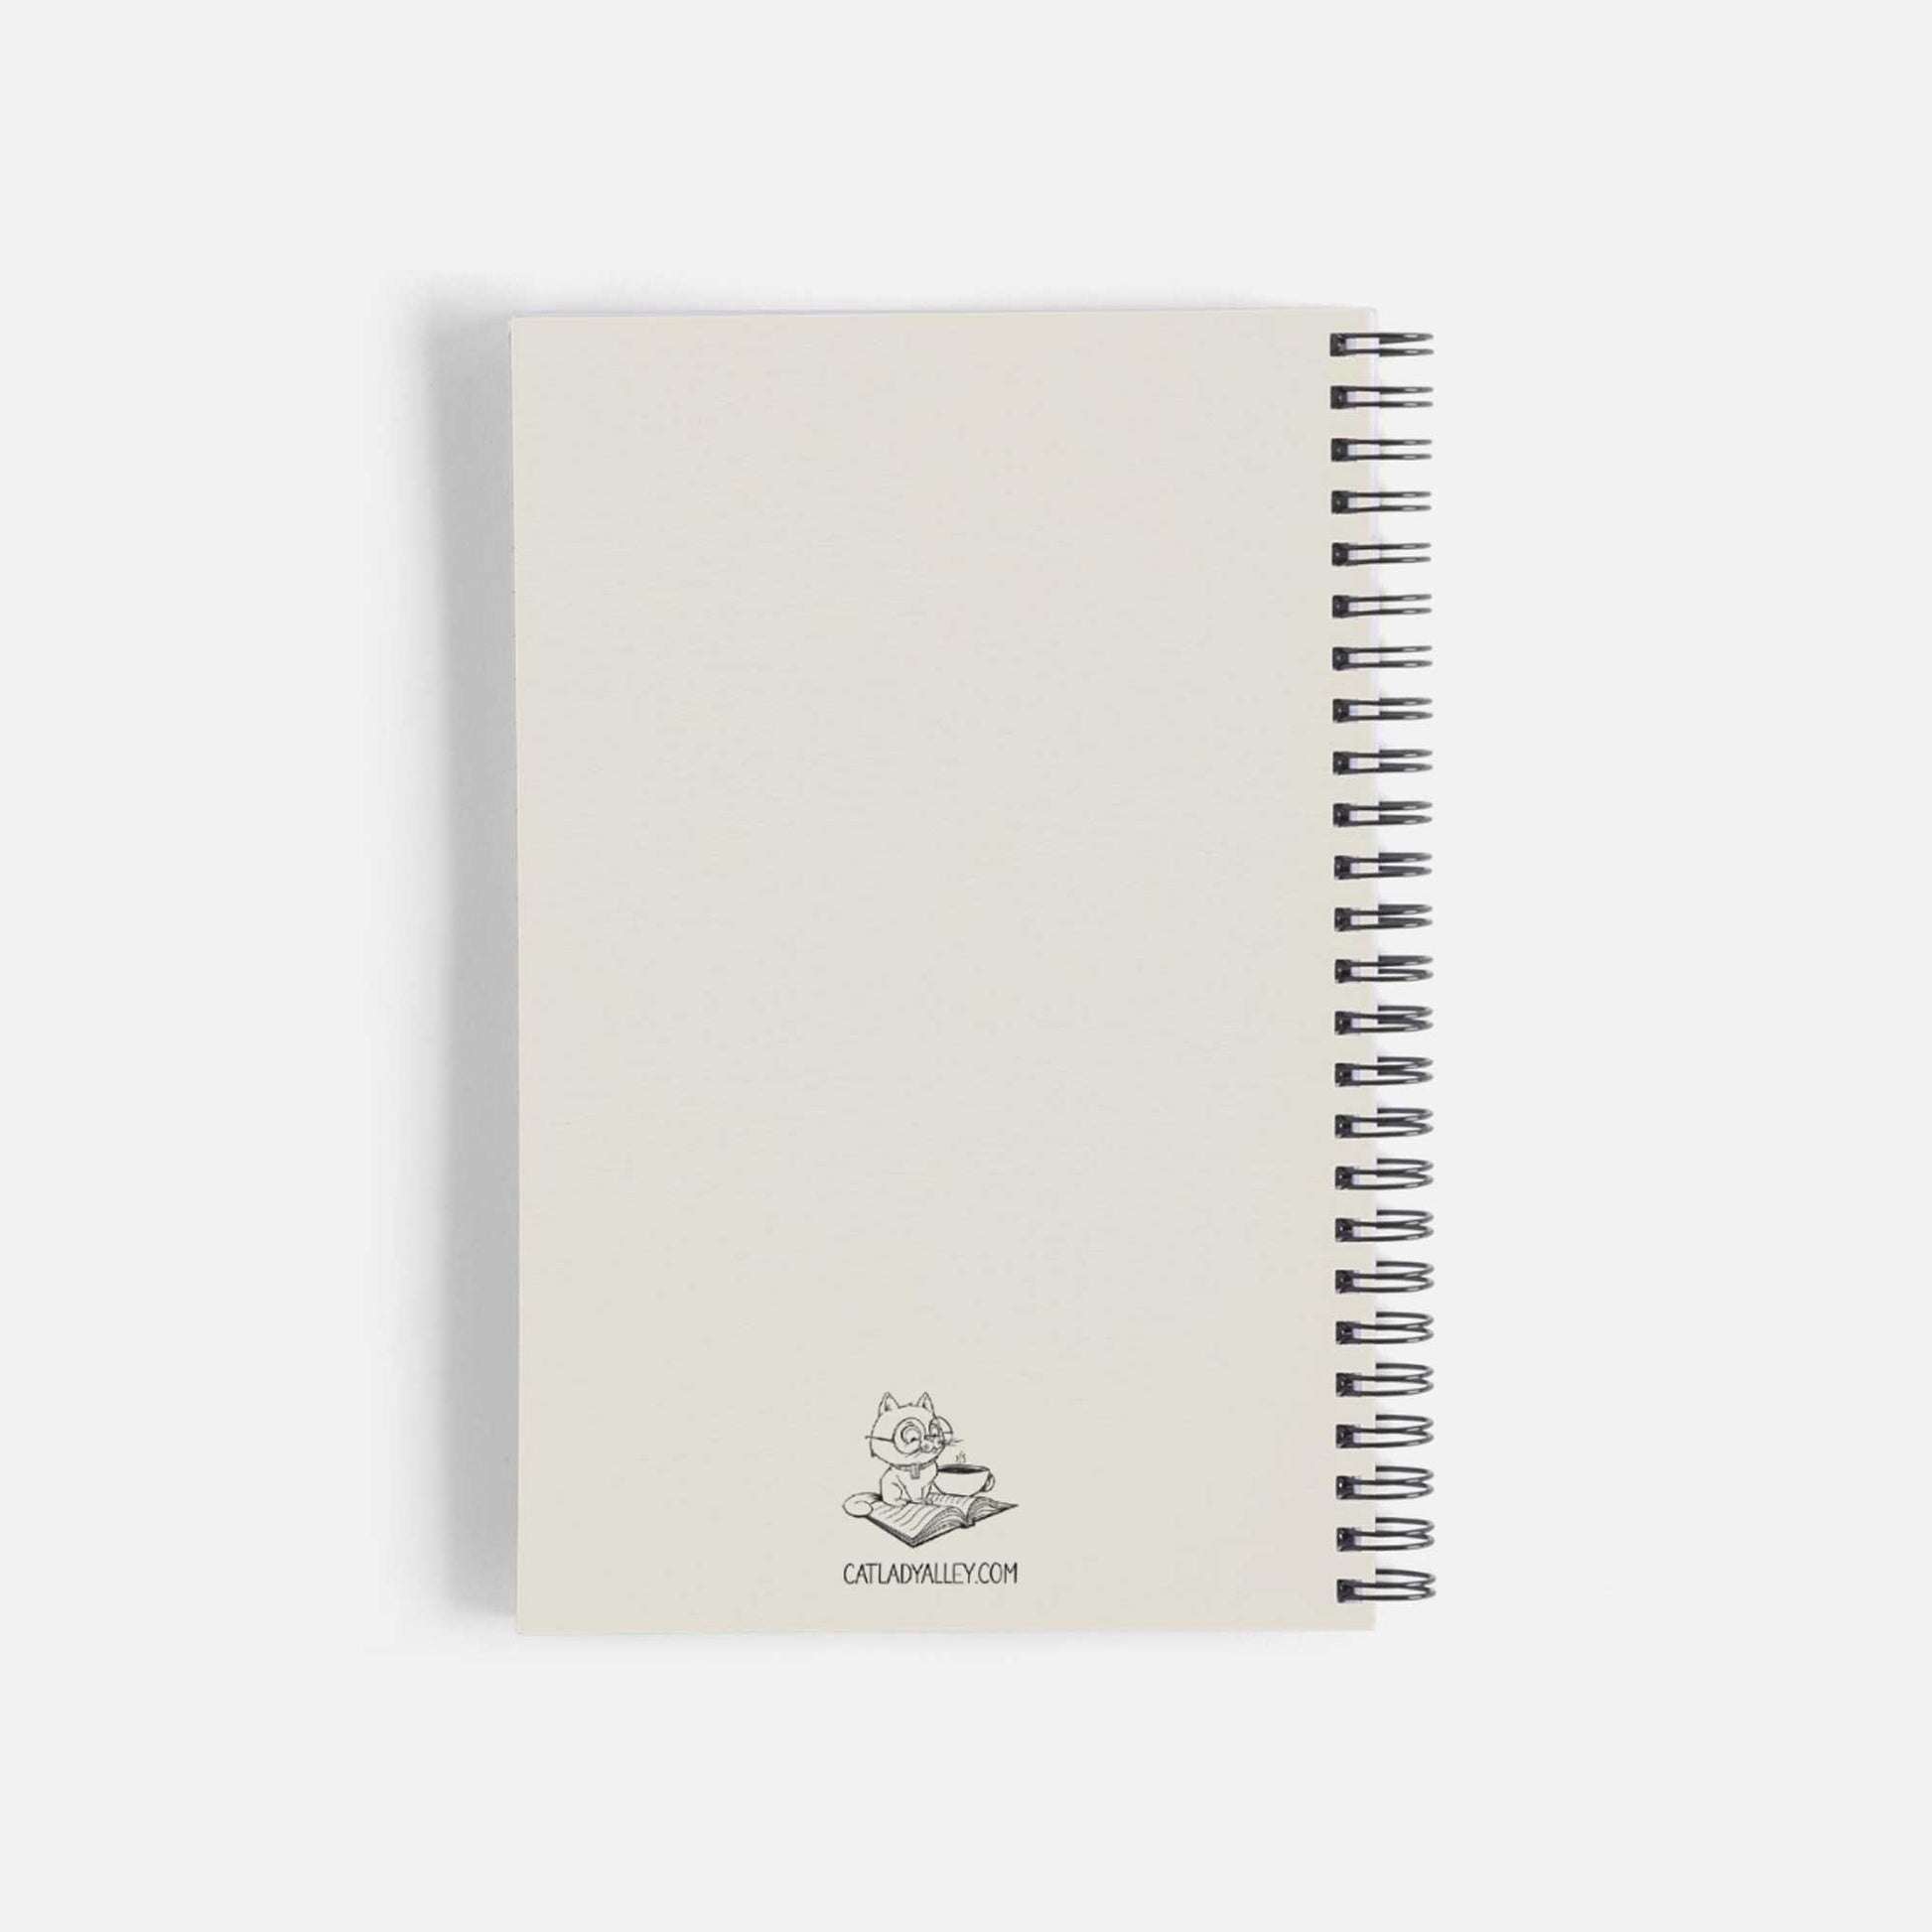 cats, coffee, books spiral notebook back cover